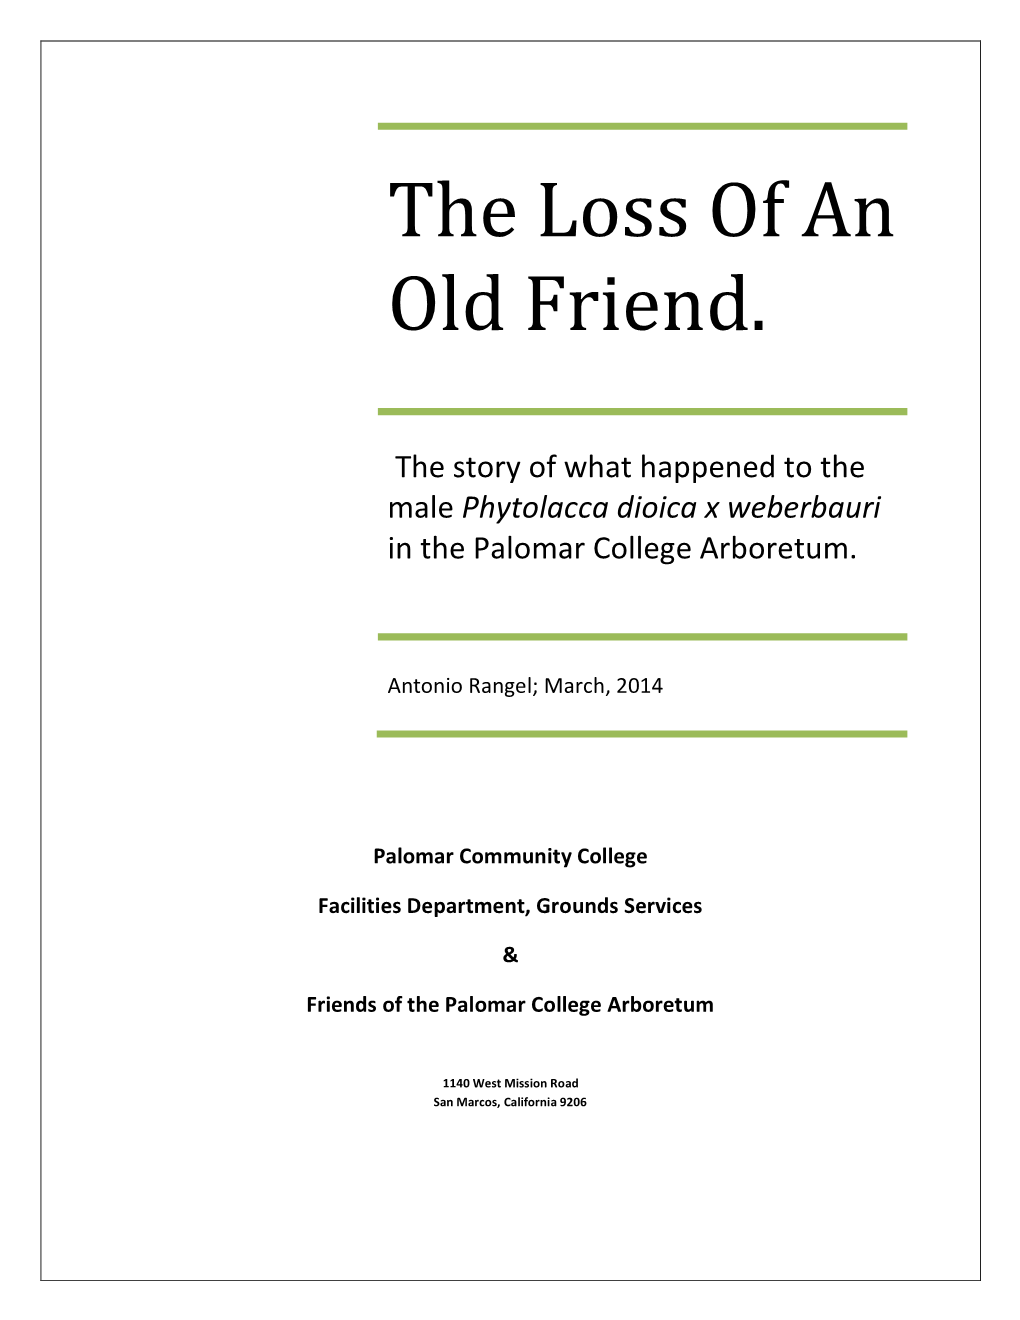 The Loss of an Old Friend